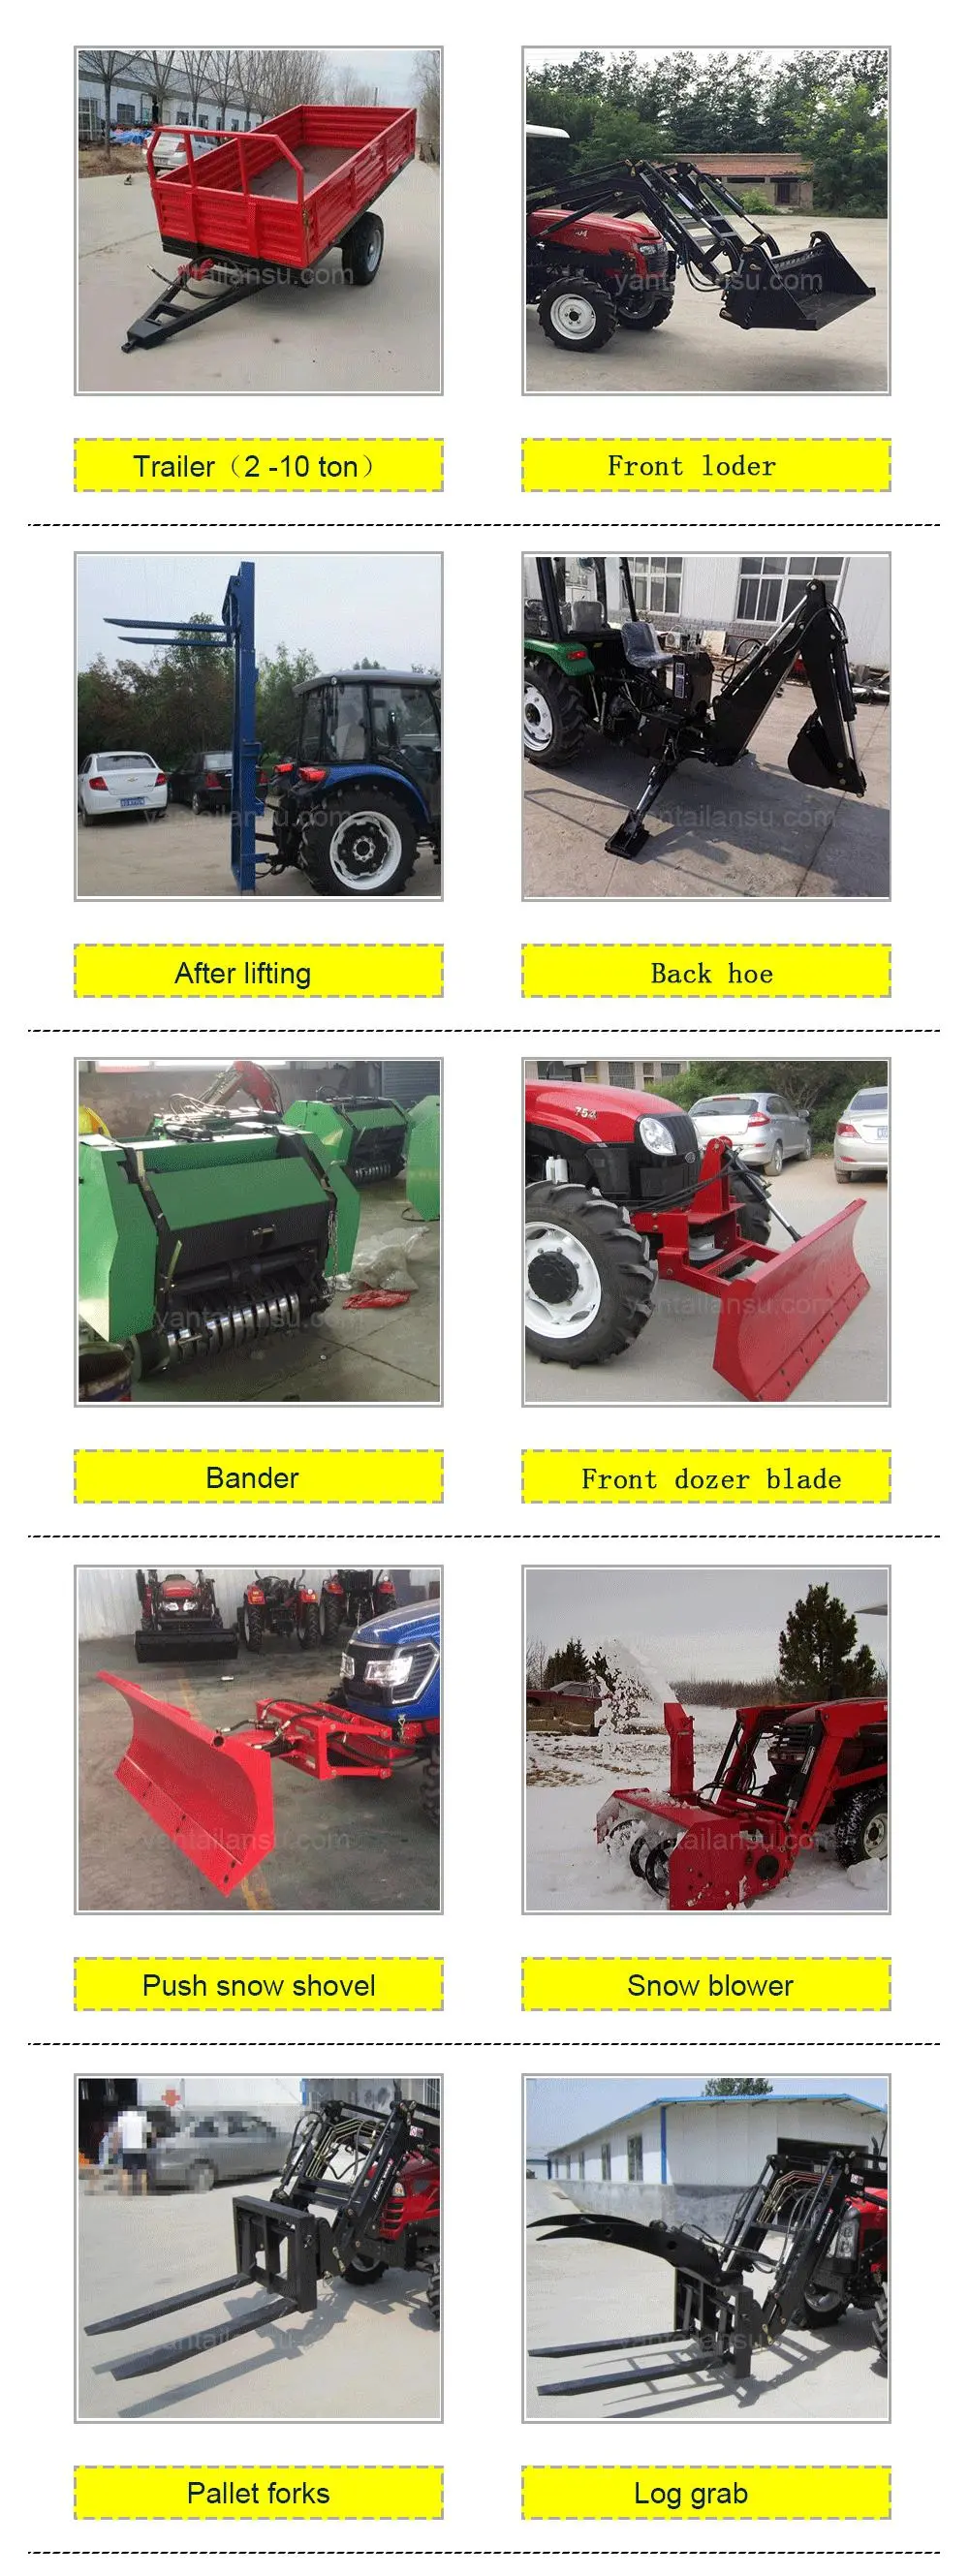 Mini Tractor Factory Good Price Tractor China Hot Sale Small Tractor Four Wheels 2WD 4WD Tractor